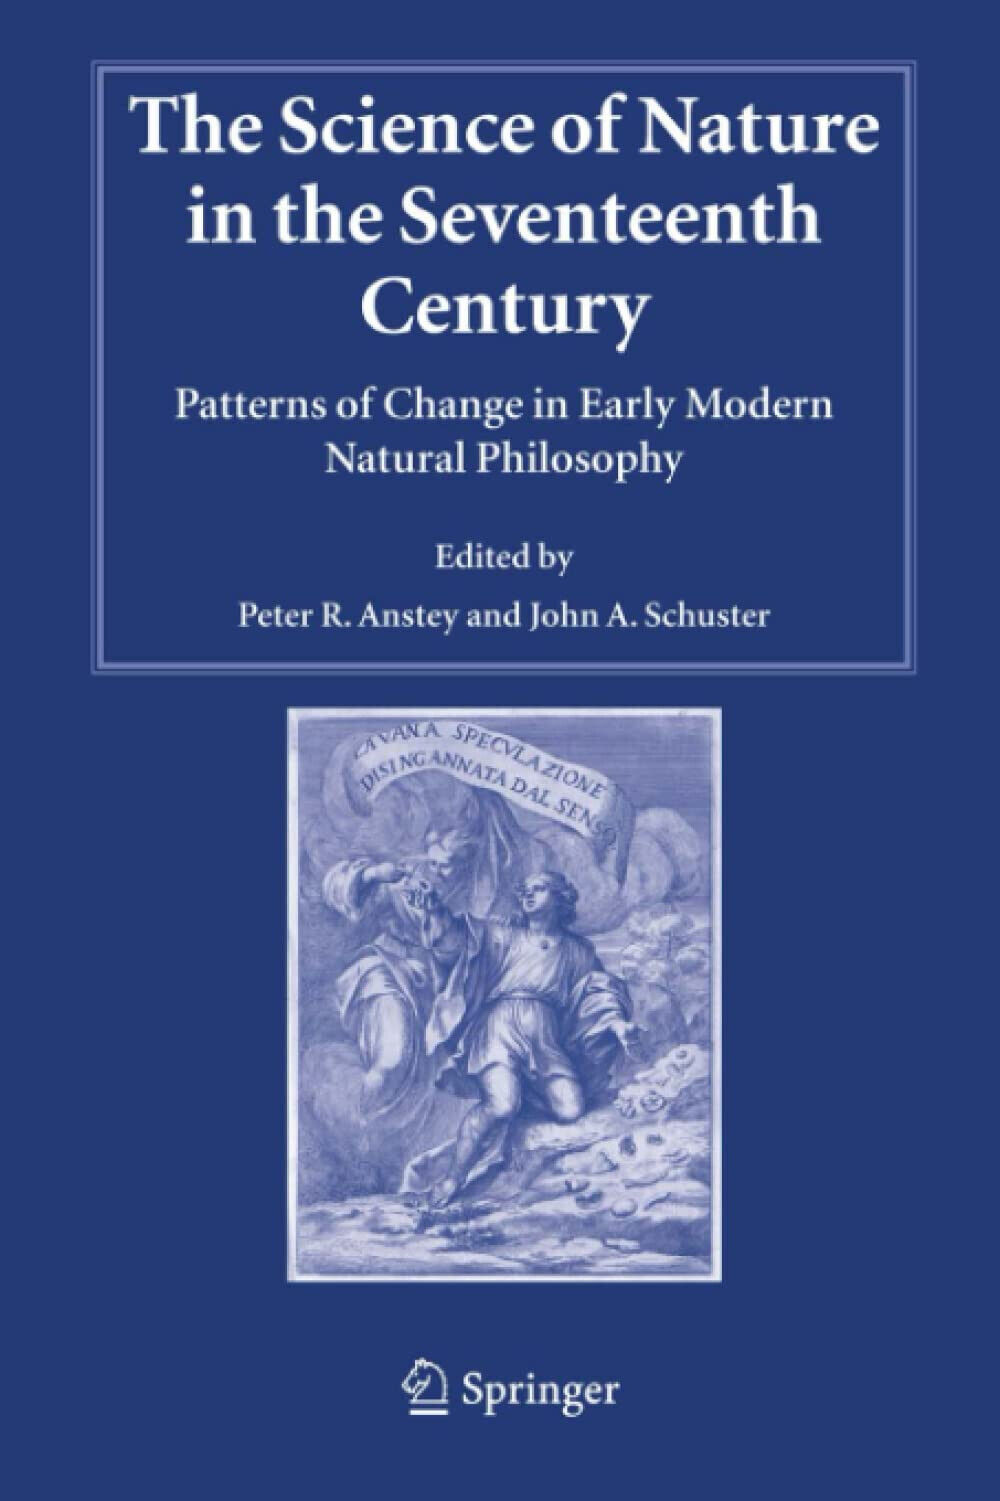 The Science of Nature in the Seventeenth Century - Peter R. Anstey  - 2010 libro usato